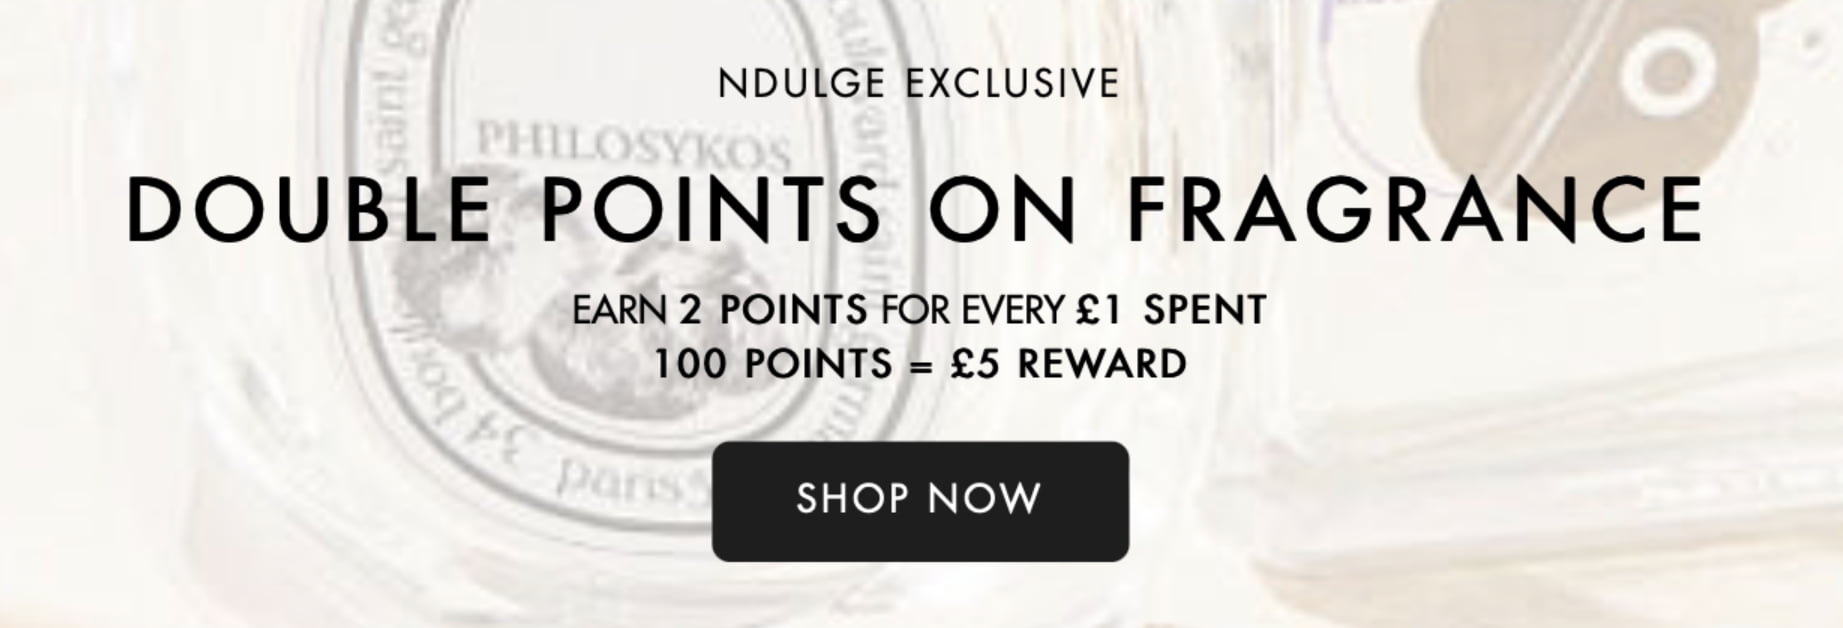 Double Points on Fragrance at Space NK